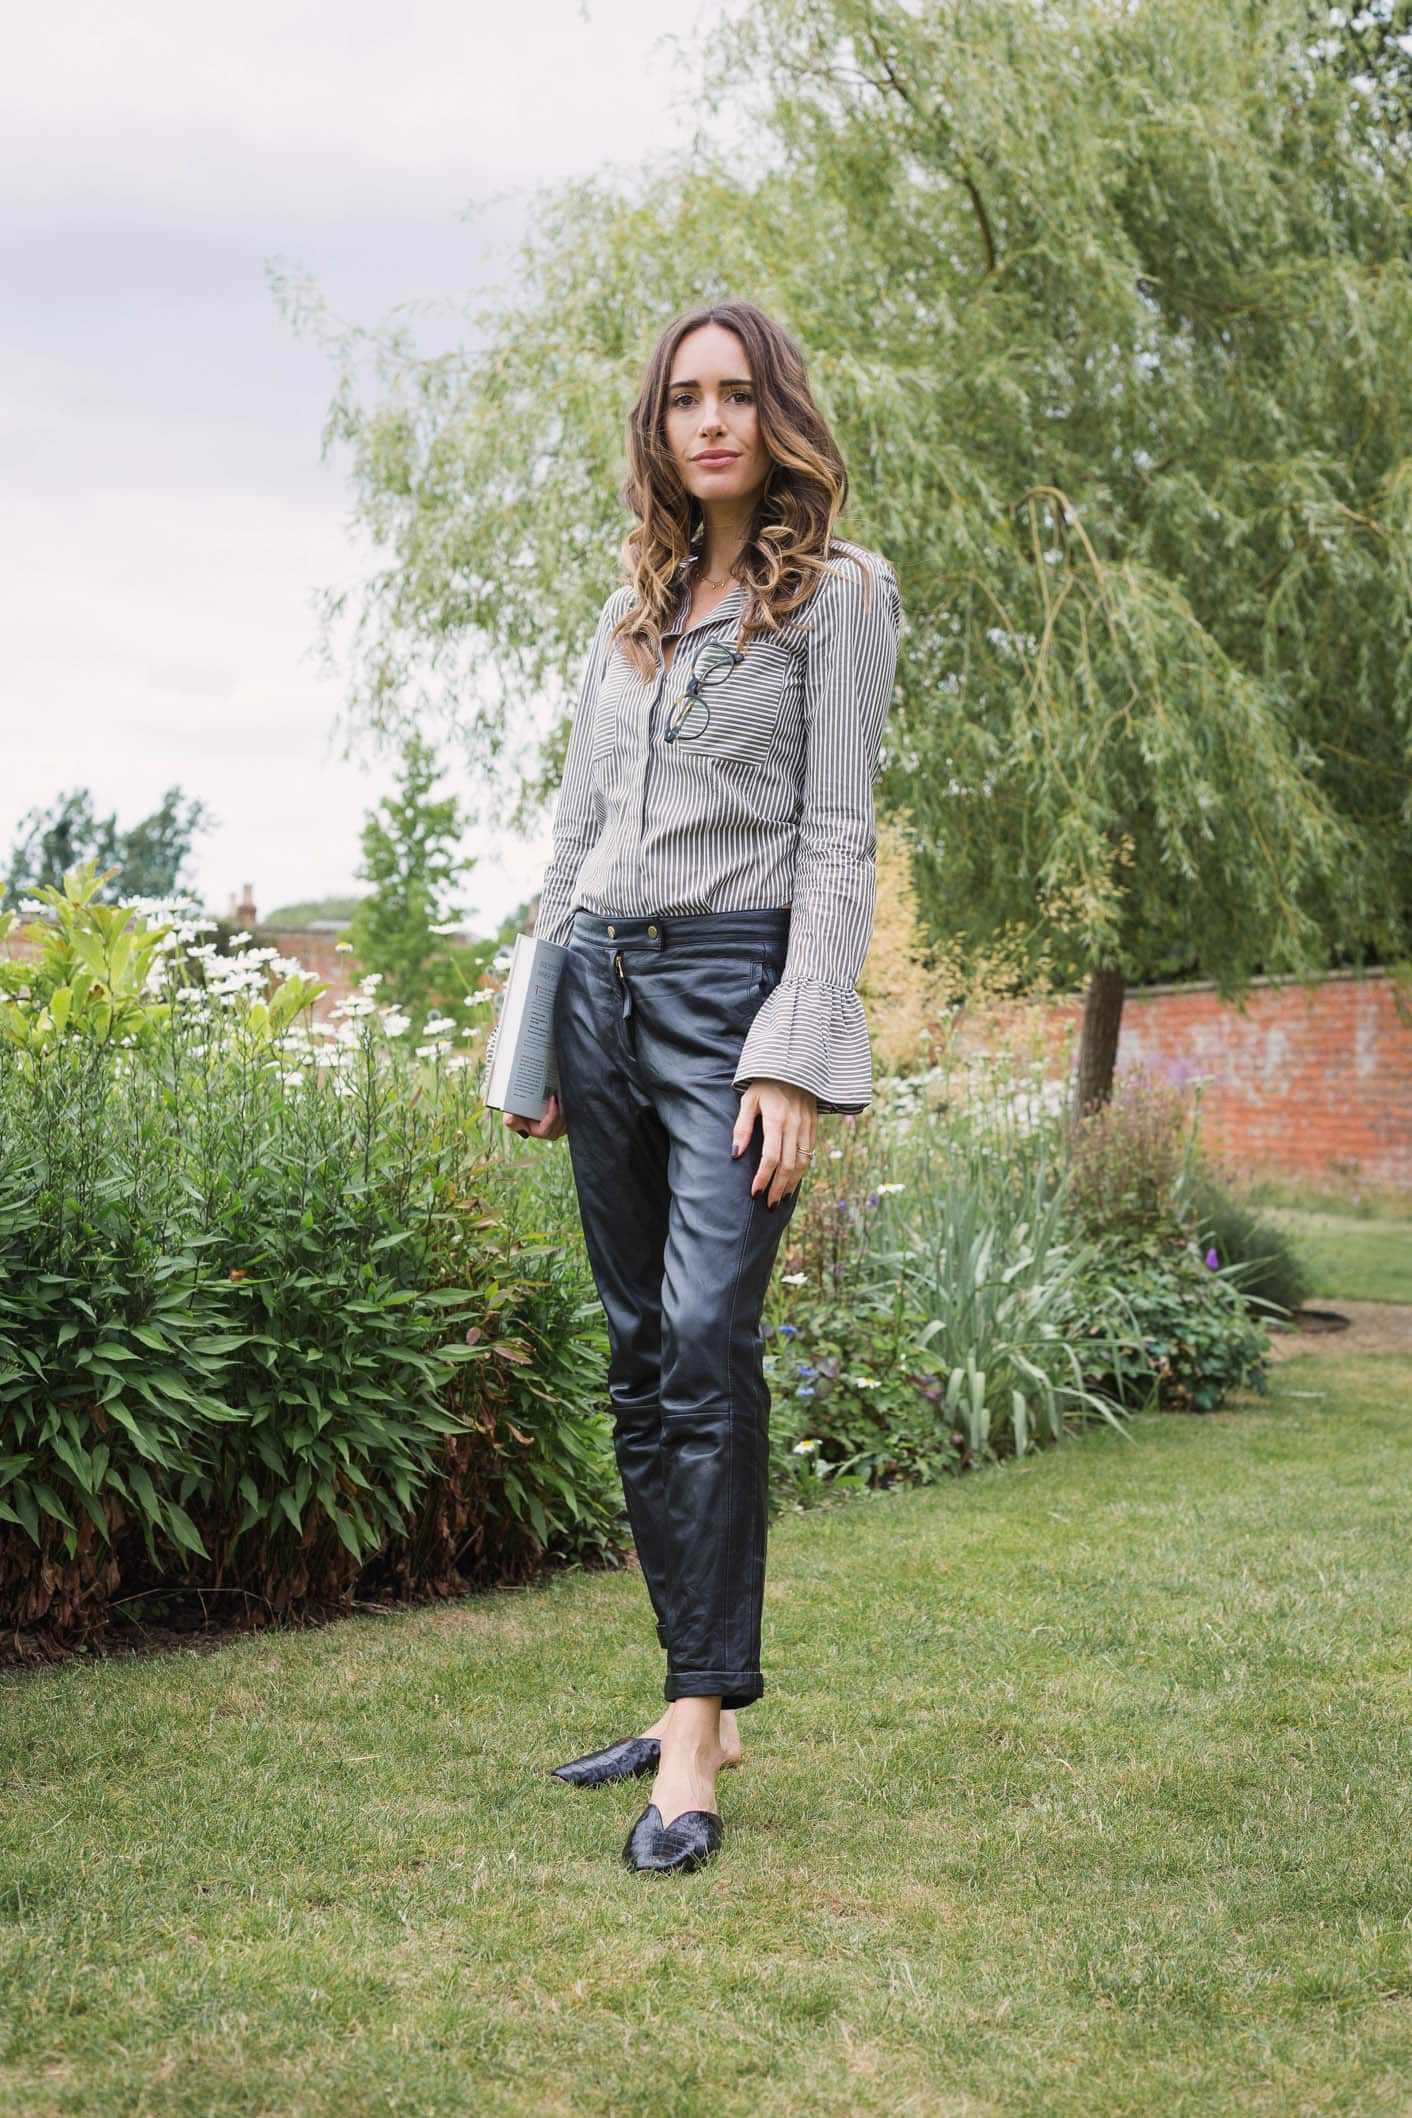 Louise Roe showcases a chic work outfit featuring leather pants and a striped blouse